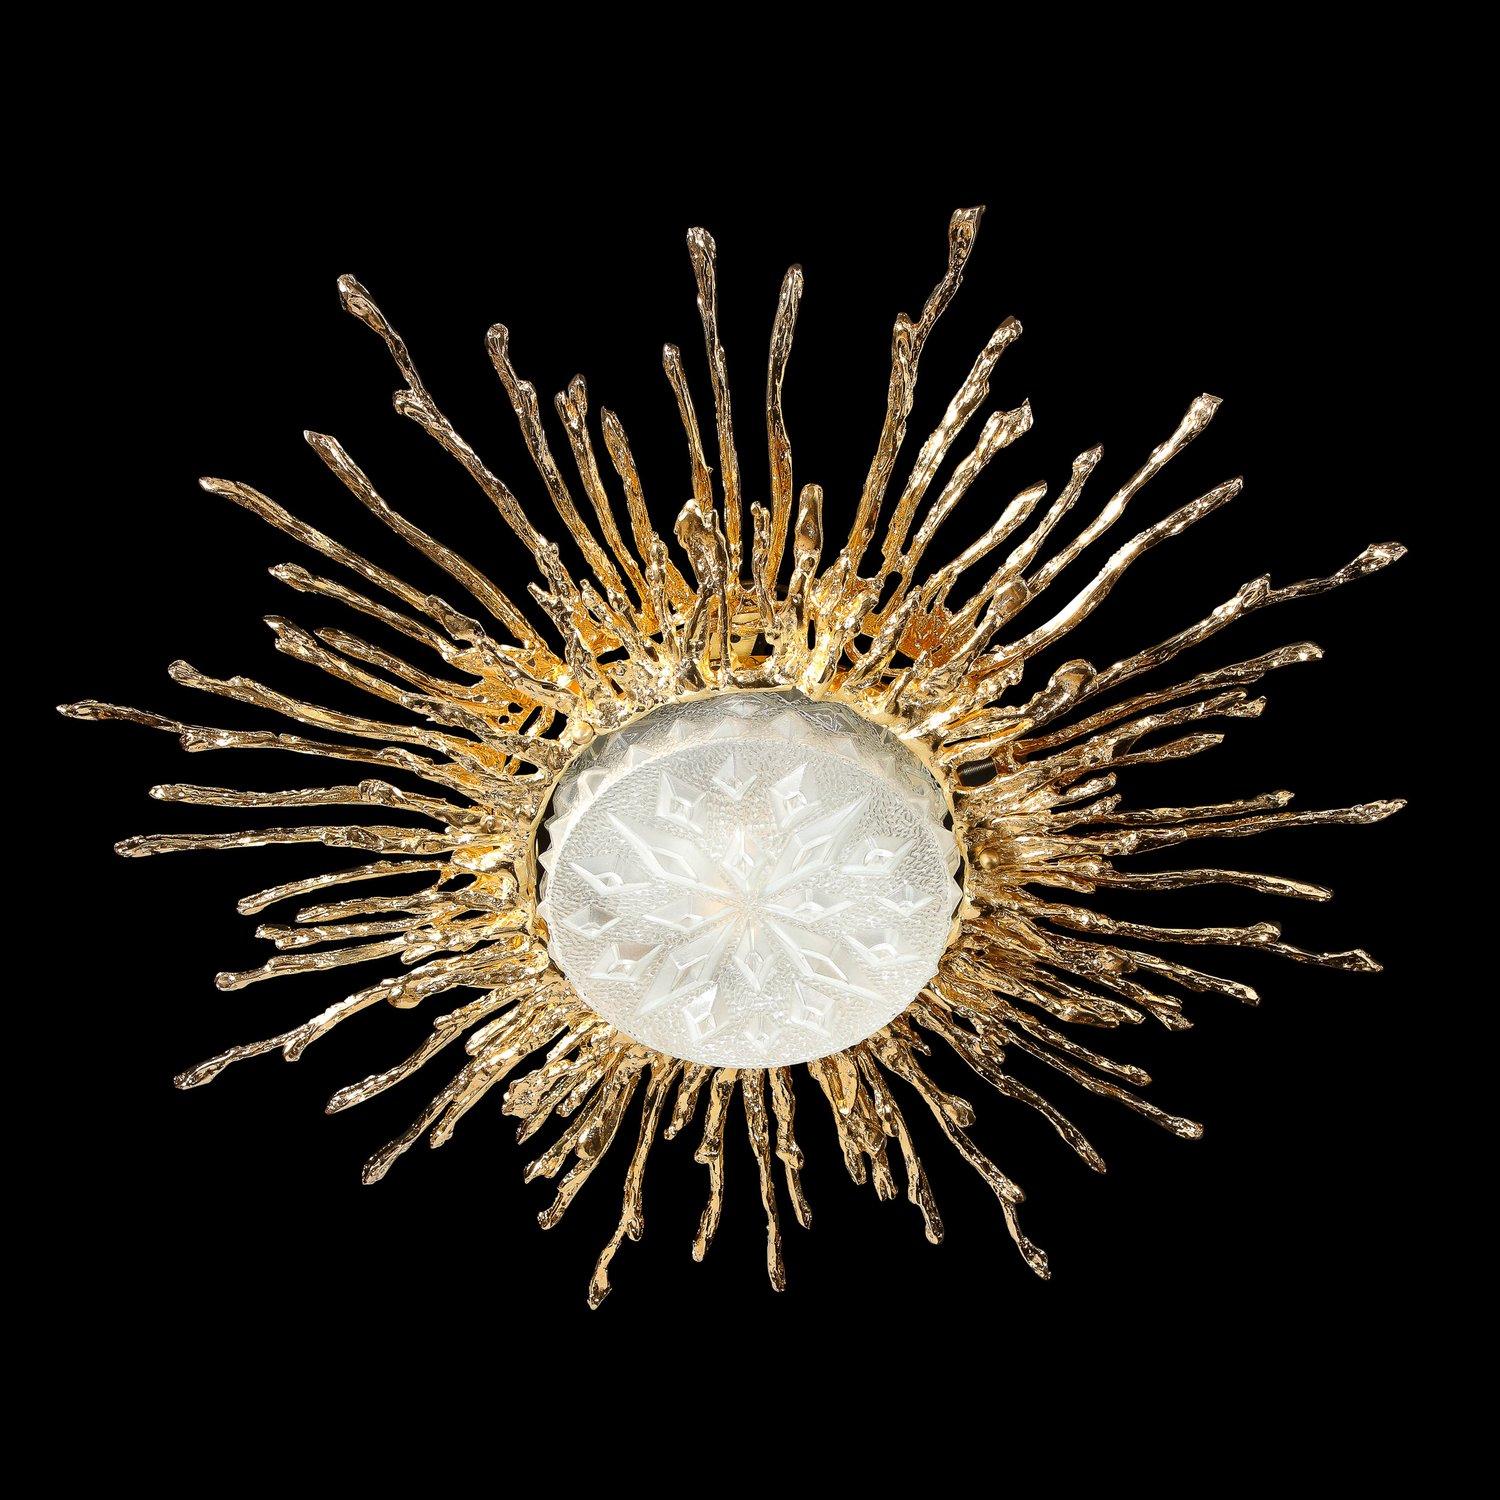 This stunning and dramatic flush mount was hand crafted by the esteemed artist Claude Boeltz in France. It features an expressionistic sunburst pattern realized in two rows of exploded bronze plated in pure 24-karat yellow gold, the tendrils